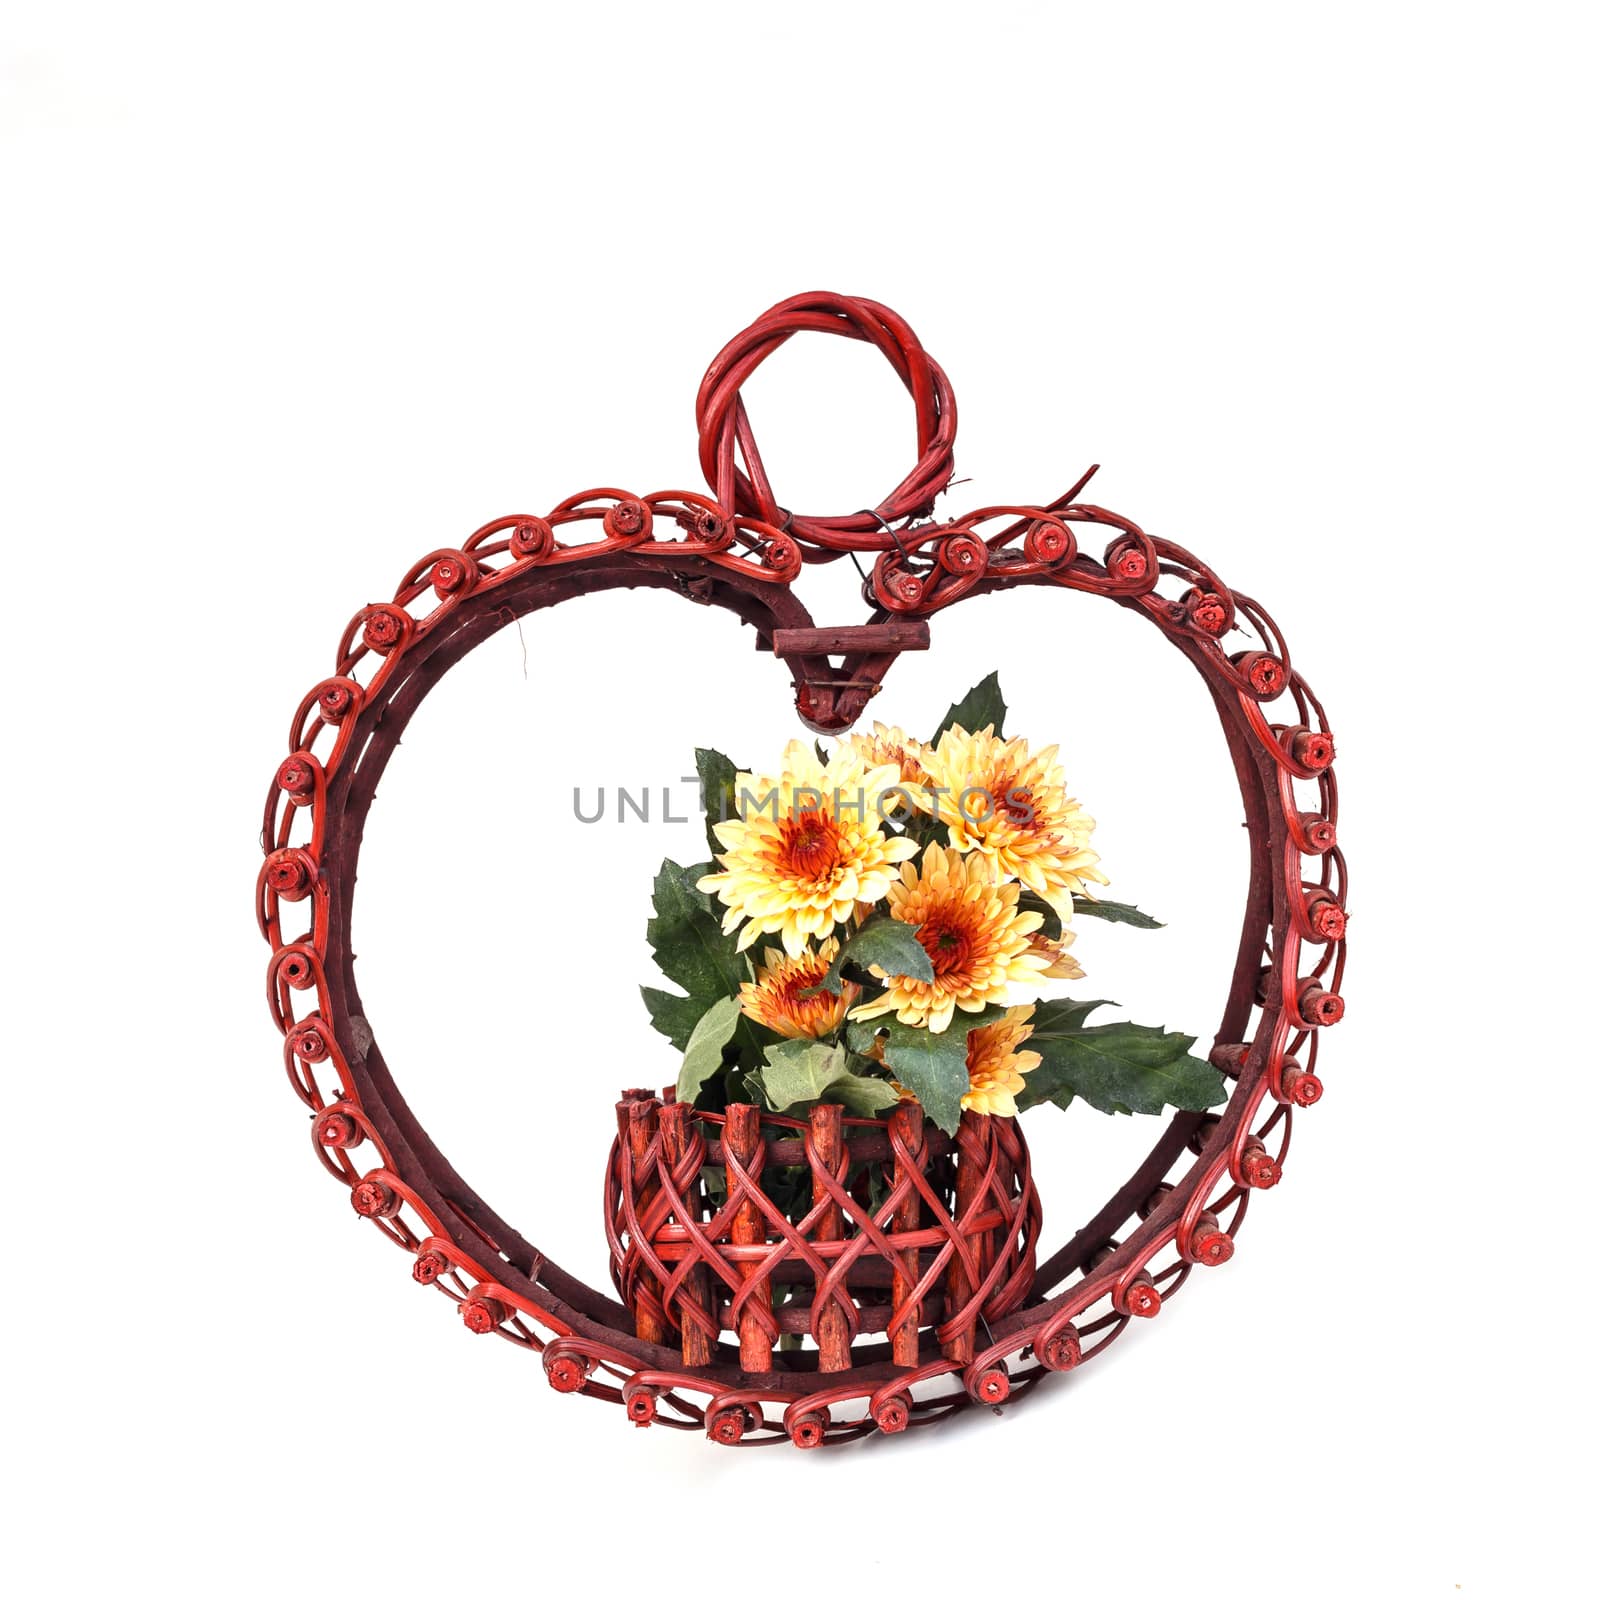 Flower in wooden handmade basket isolated on white background by nanDphanuwat